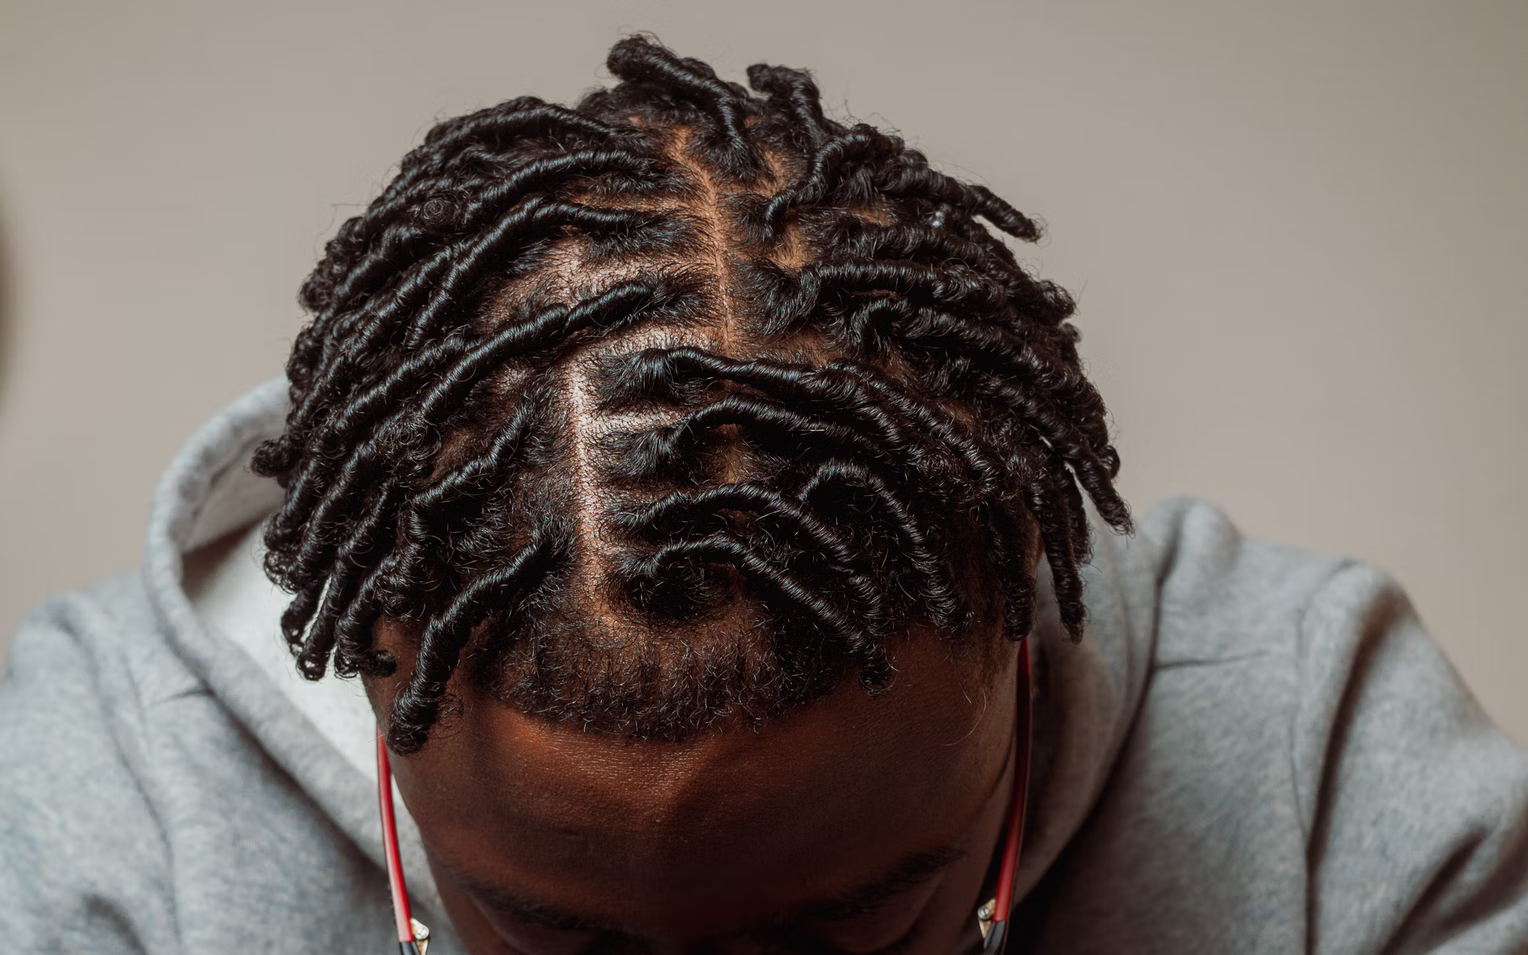 What Are The Costs of Maintaining DreadLocks?